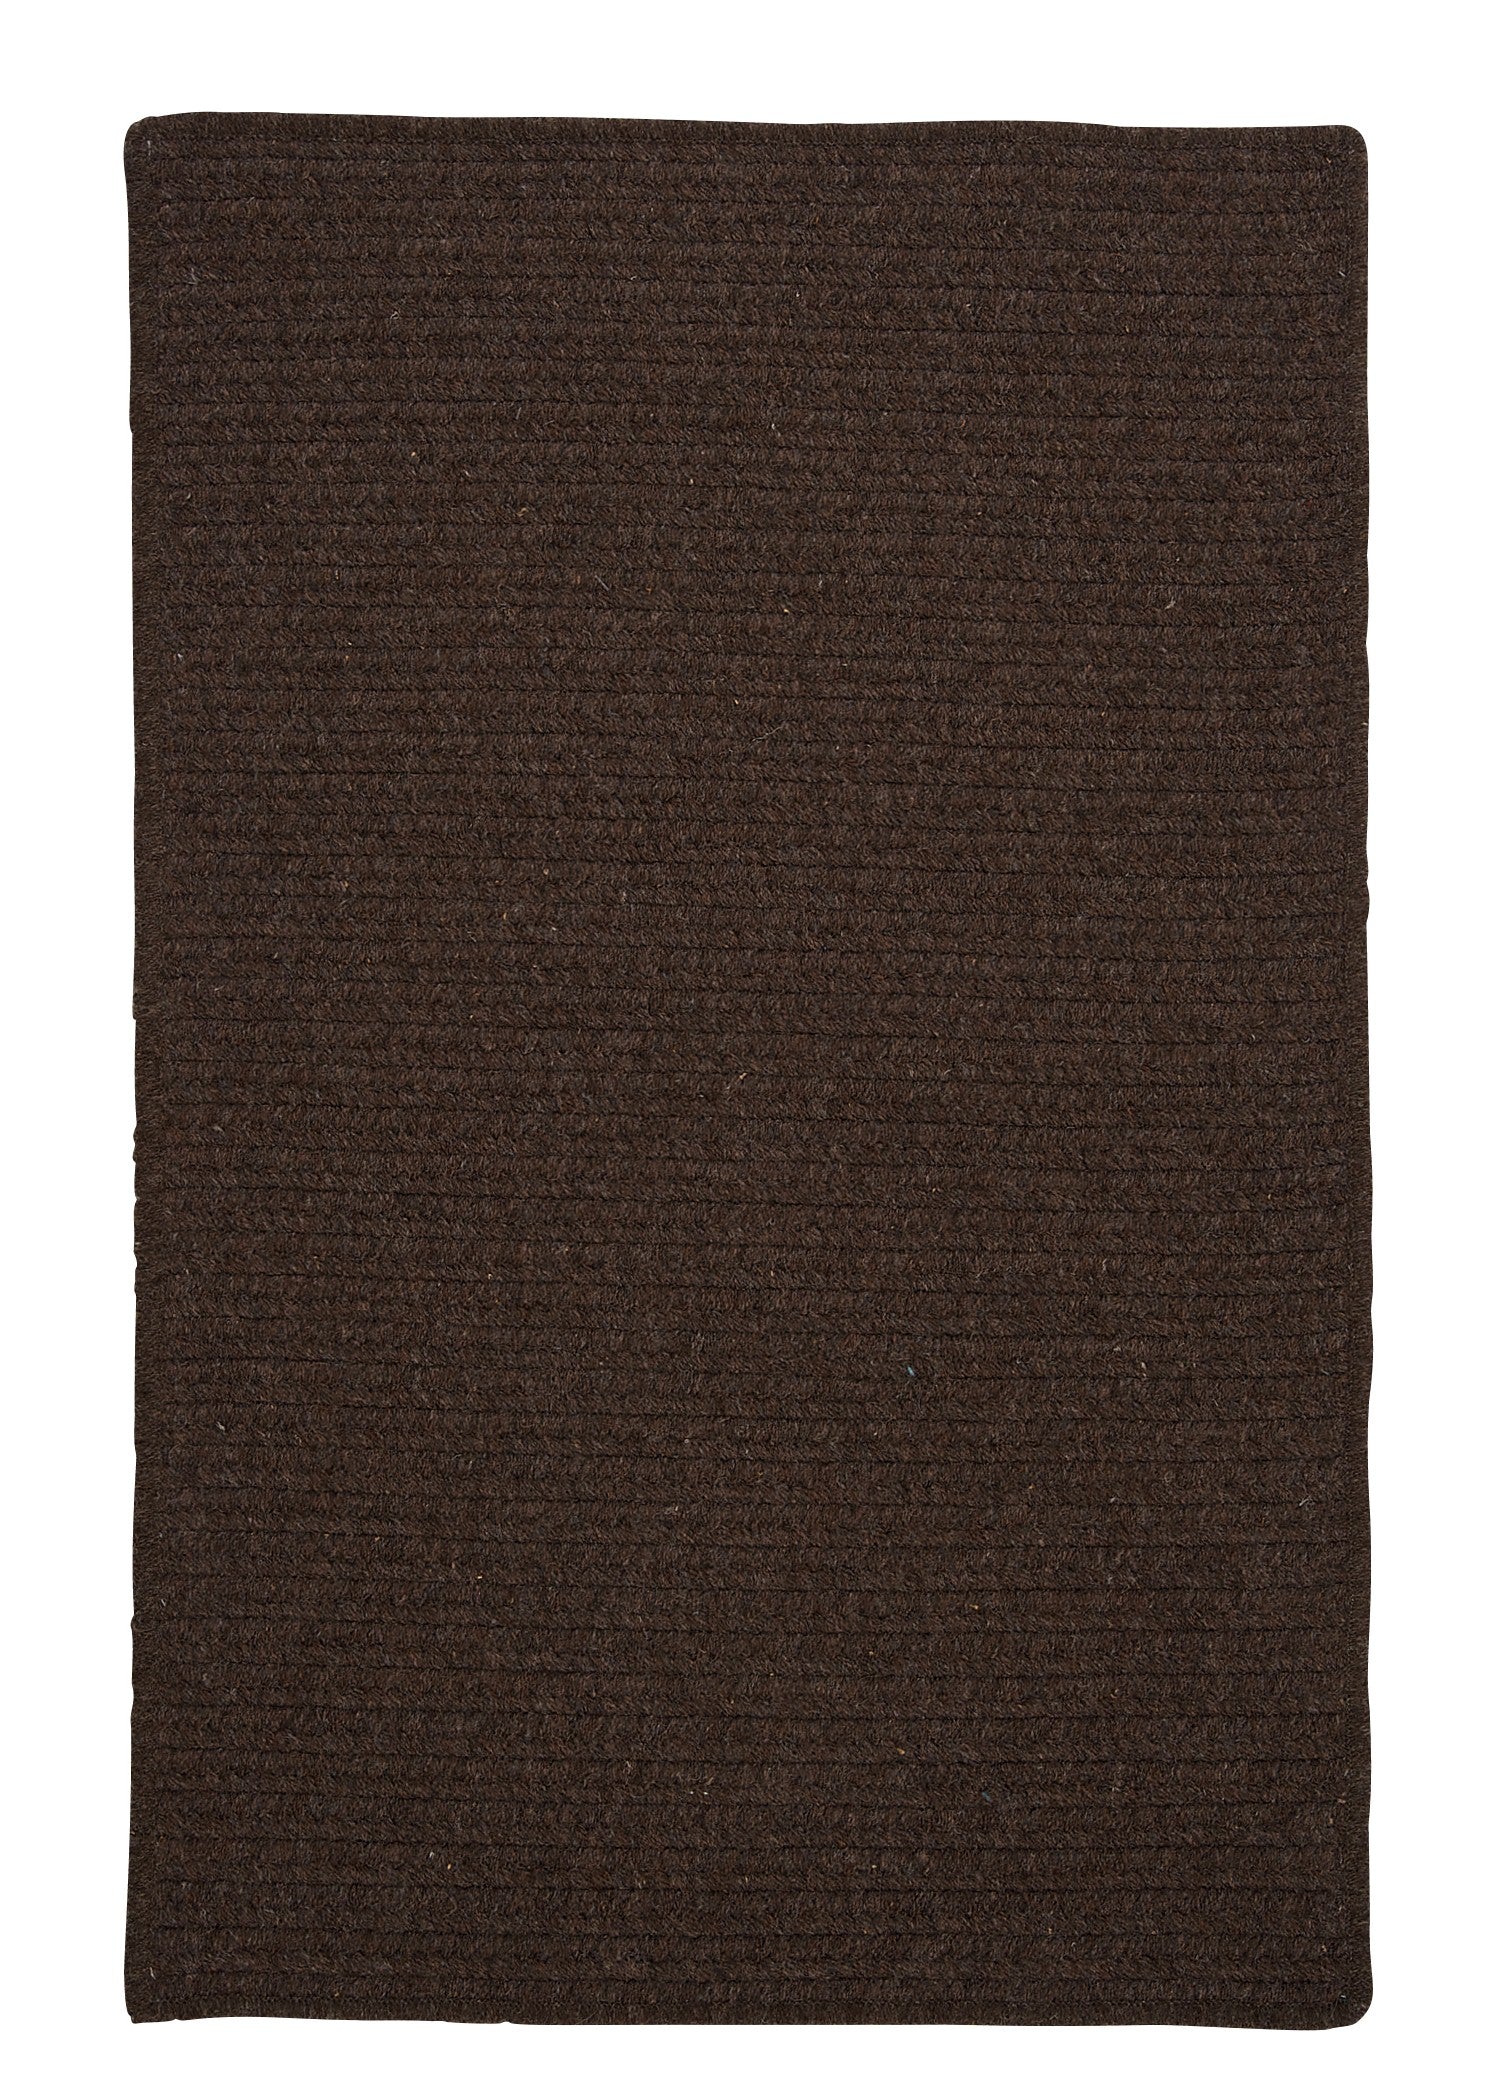 Colonial Mills Courtyard CY64 Cocoa Traditional Area Rug